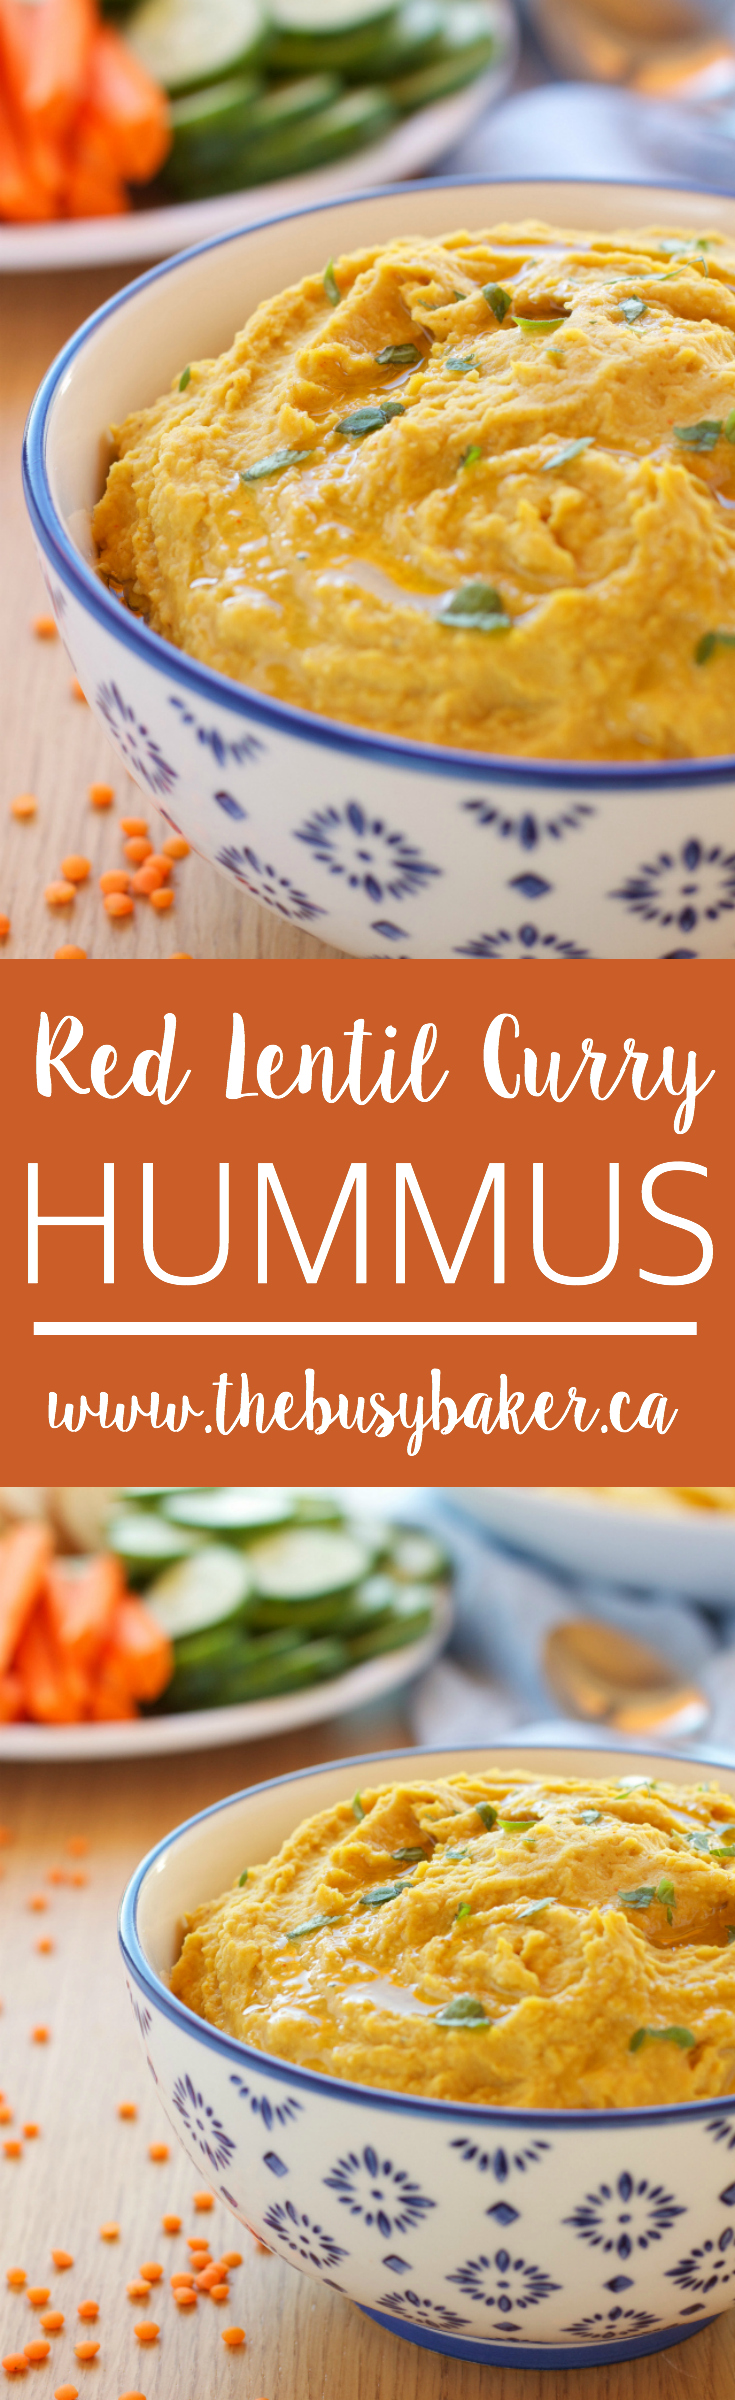 This Red Lentil Curry Hummus is a delicious vegetarian dip packed with protein and fiber! It makes the perfect healthy appetizer! Recipe from thebusybaker.ca! via @busybakerblog